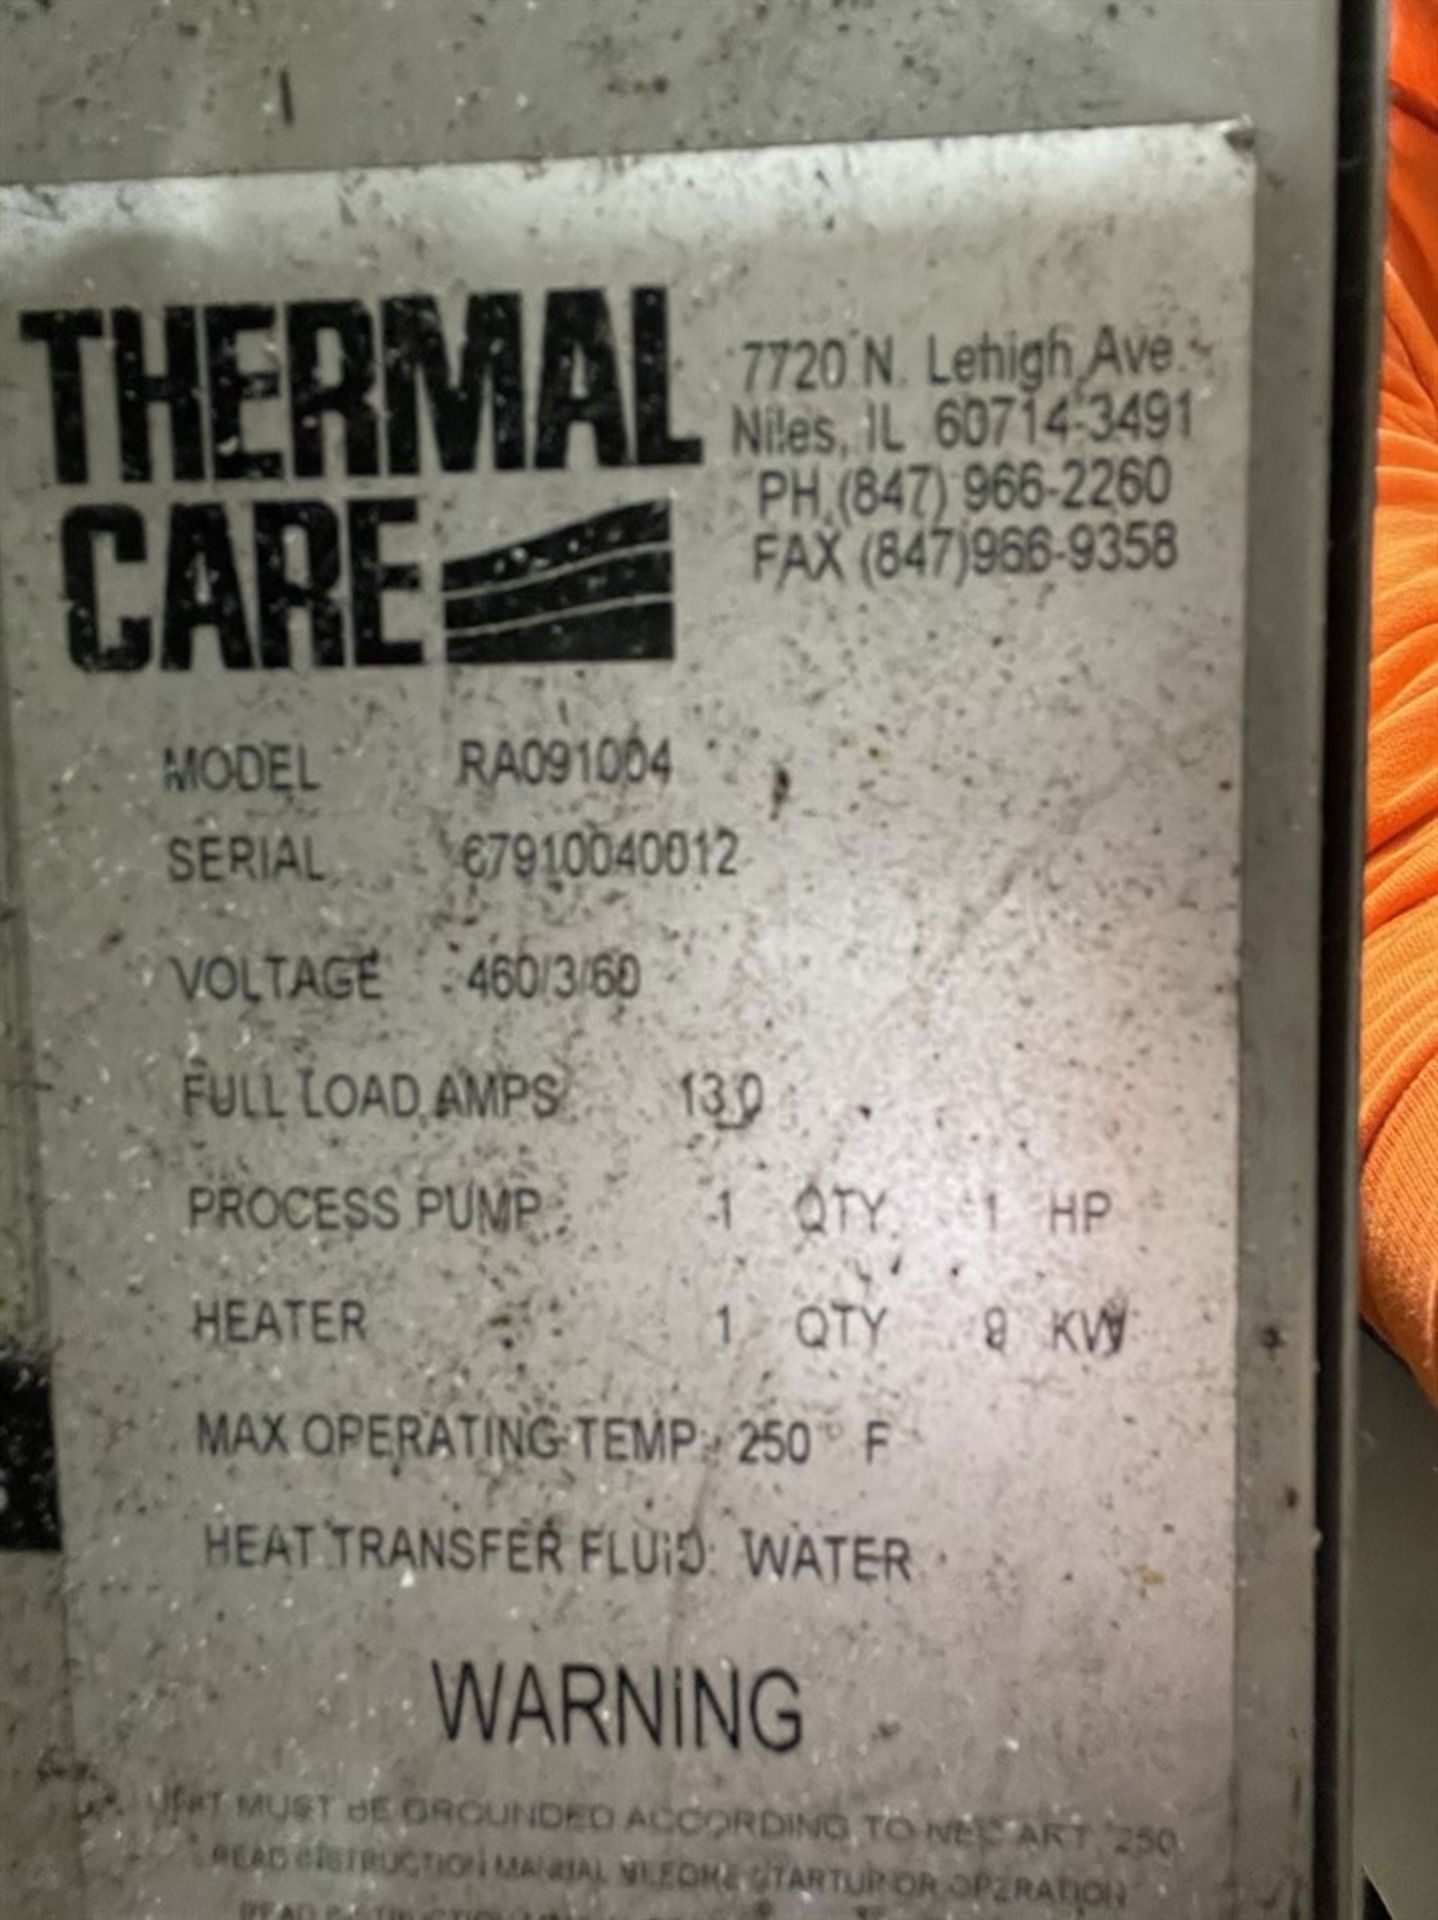 THERMAL CARE Aquatherm RA091004 Temperature Controller, s/n 67910040012 - Image 3 of 3